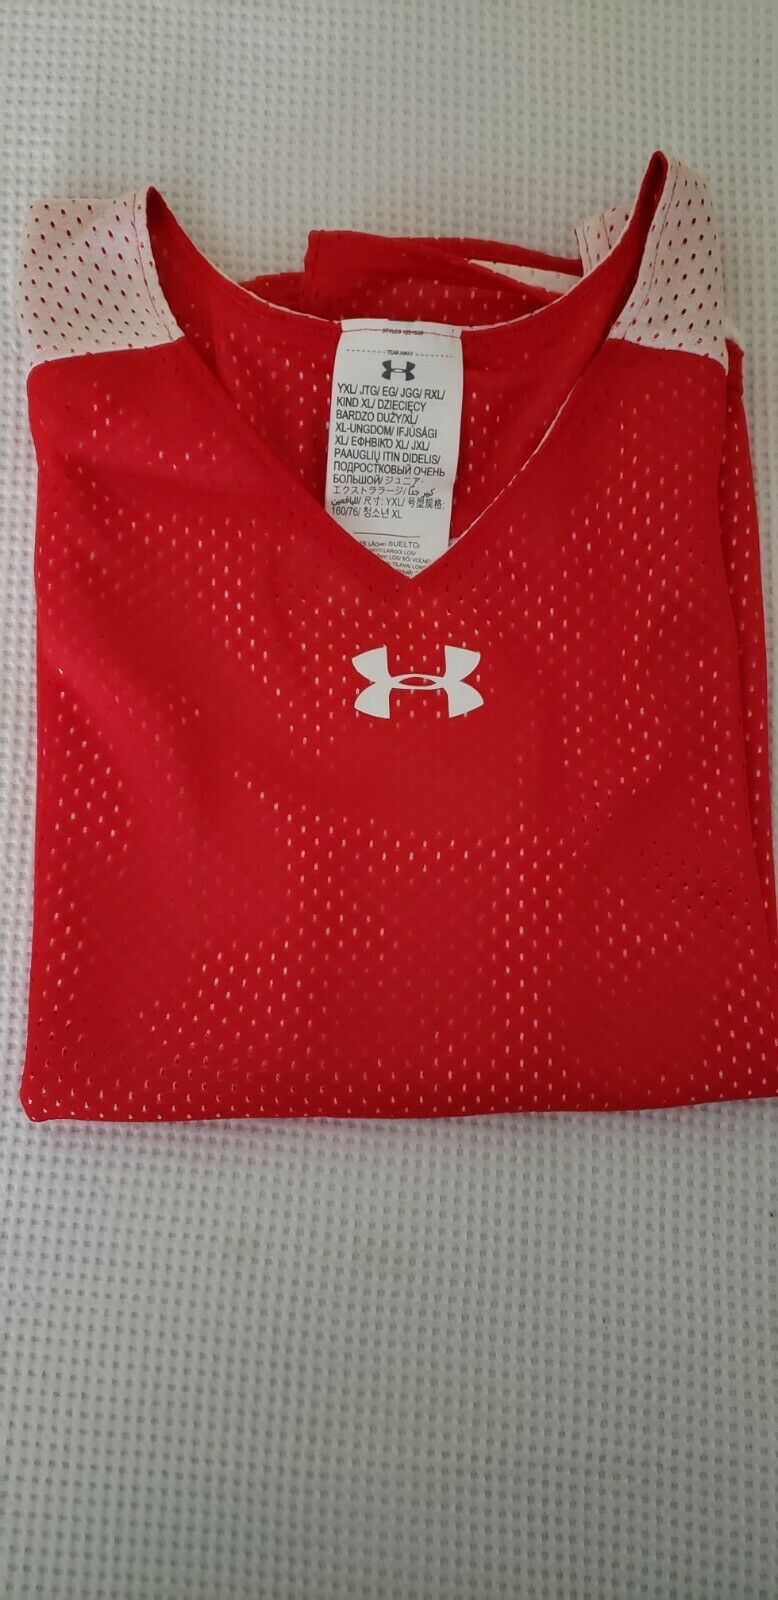 Under Armour Jersey Youth XL Red And White NWT Reversible